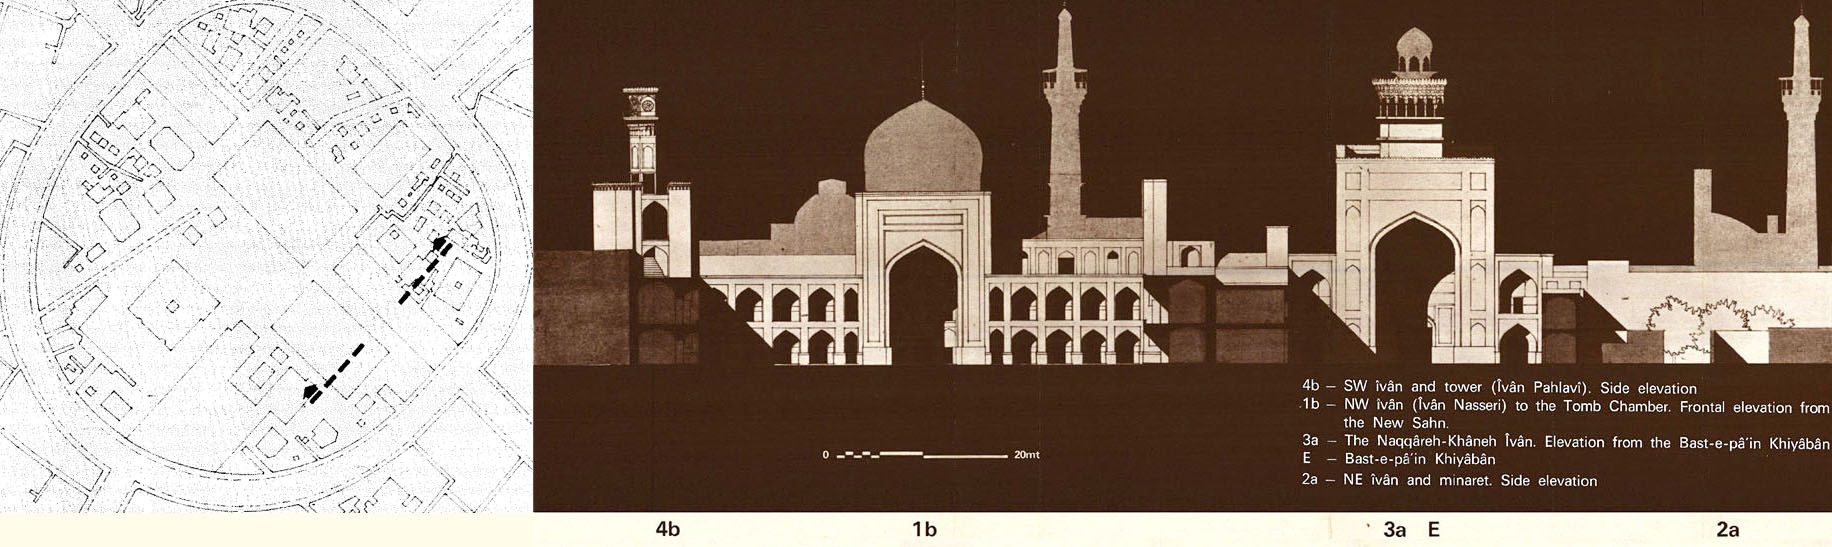 Transverse section, showing from left to right: Side elevation of SW iwan and tower (or, Iwan Pahlavi, 4b); Frontal elevation from new courtyard of the NW iwan to the Tomb Chamber (or, Iwan Nasseri, 1b); Elevation of Naqqare-Khane Iwan from Bast-e-Pa'in Khiyaban (3a); Bast-e-Pa'in Khiyaban (E); side elevation of NE iwan and minaret (2a)